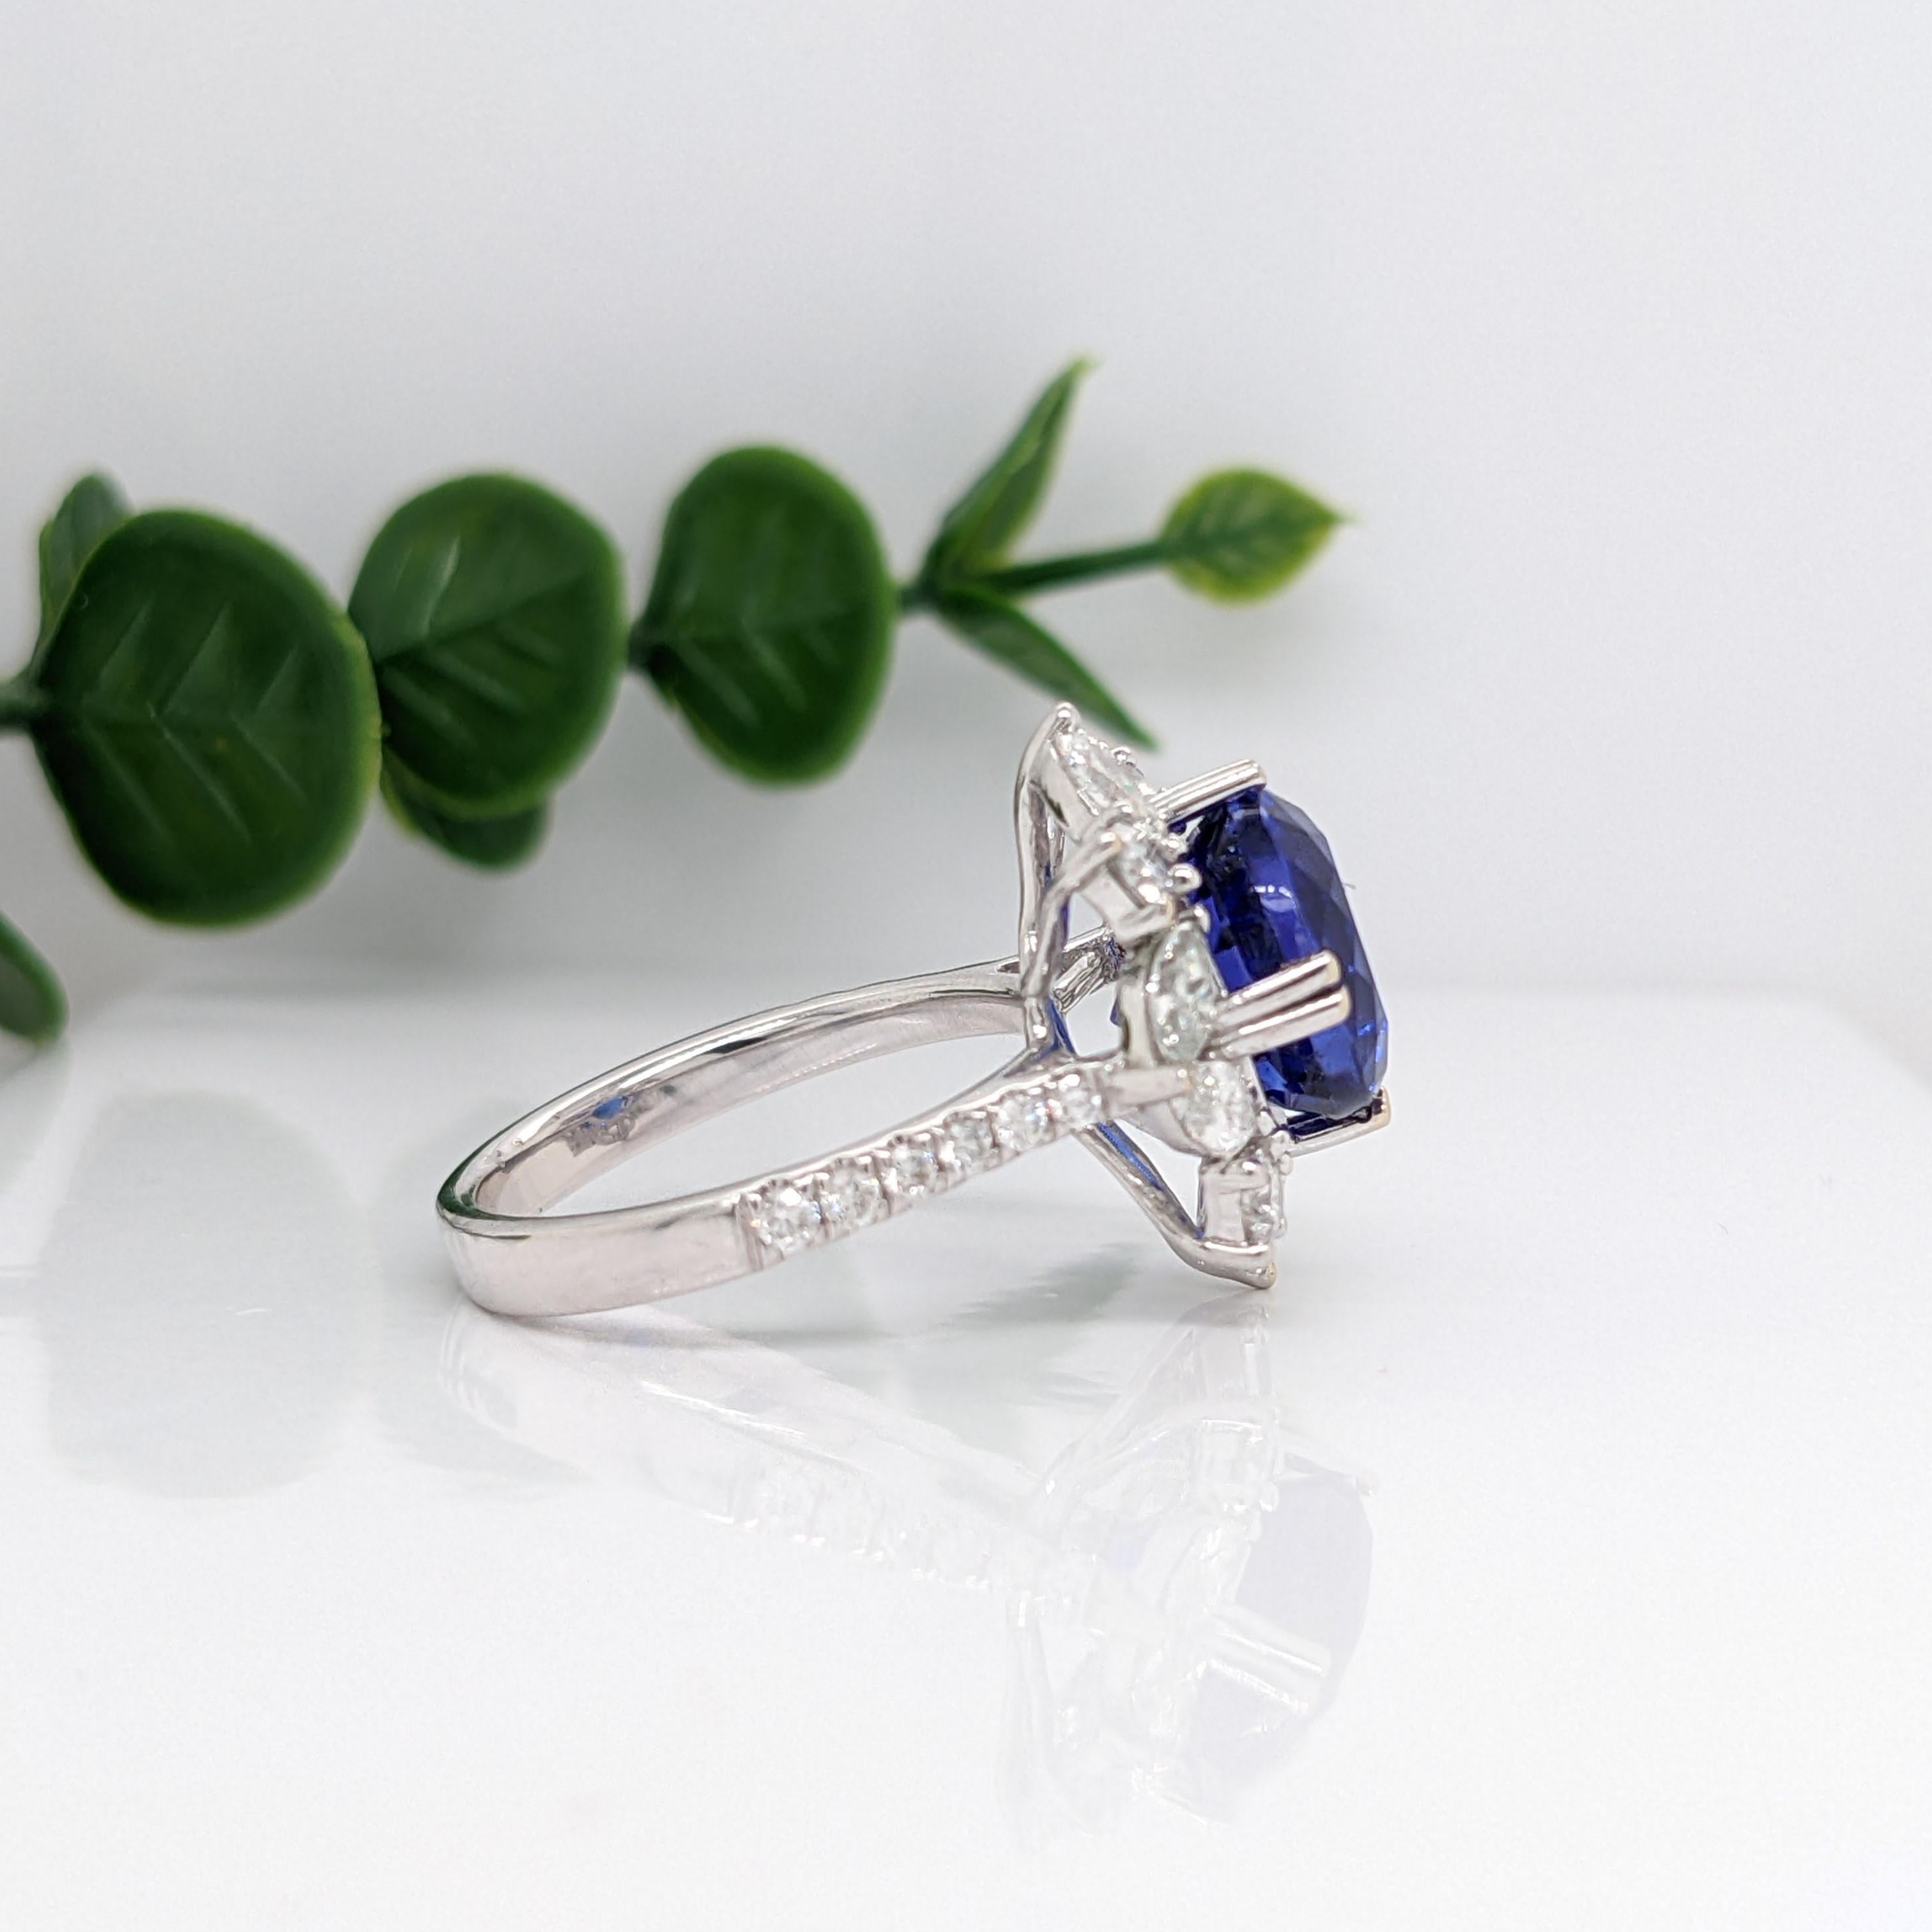 This stunning ring features a vibrant AAA Tanzanite with purple and red flashes set in 14K white gold with marquise diamond accents. This cocktail ring makes for a stunning accessory to any look!

A fancy ring design perfect for an eye catching